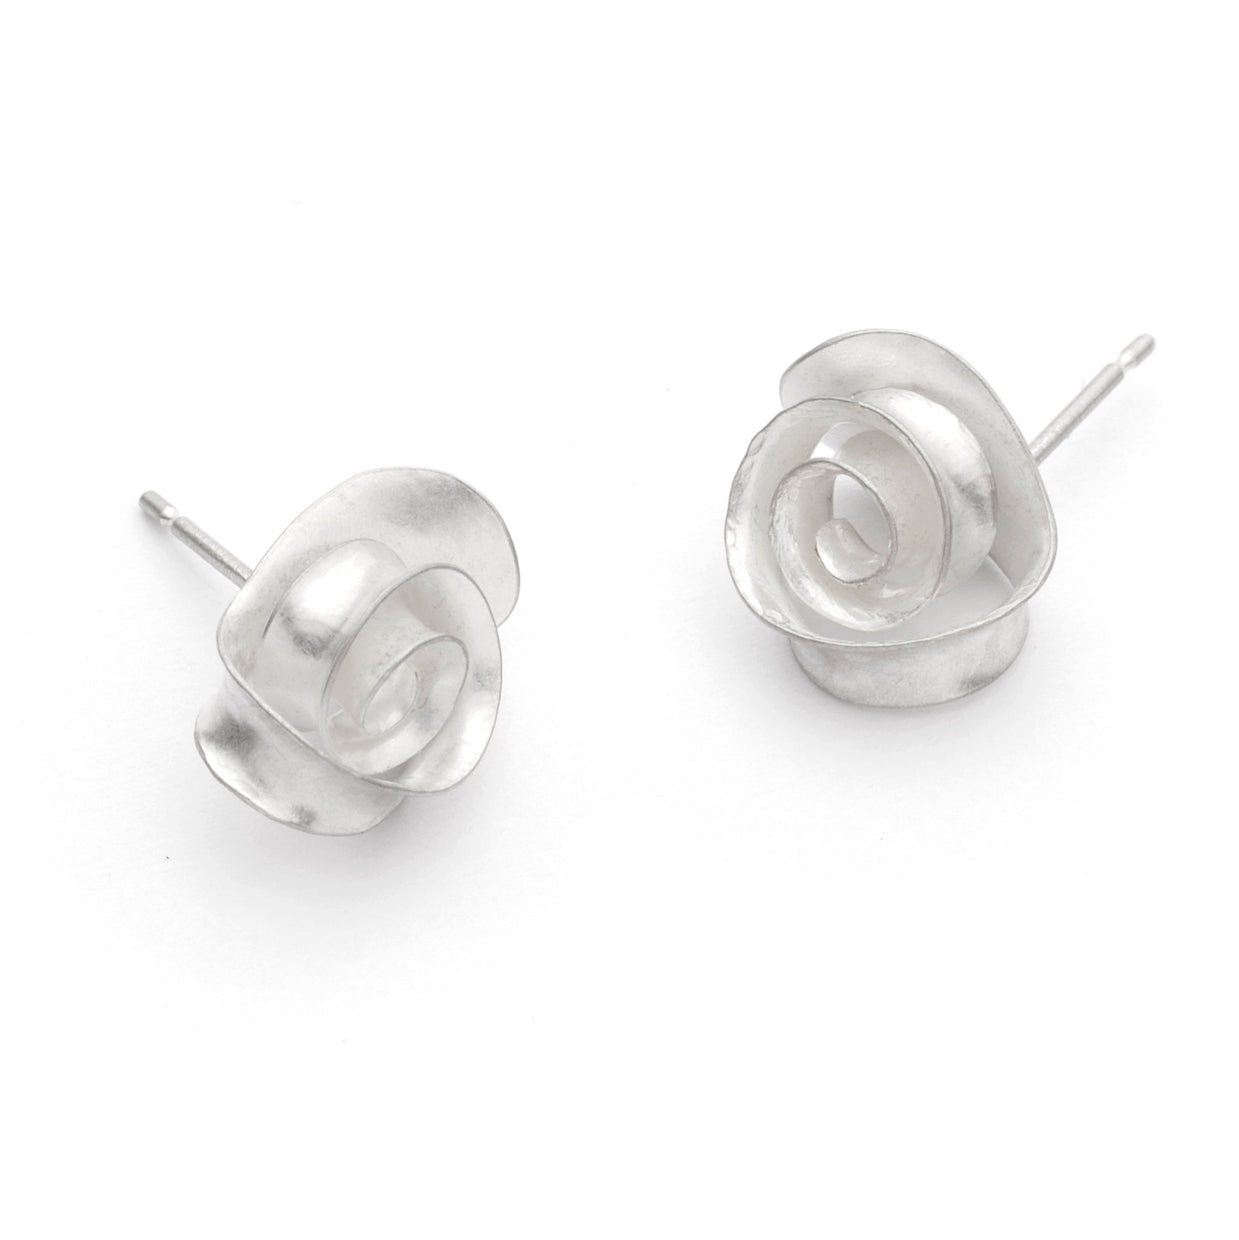 A peir of delicate swirl earrings made from recycled sterling silver. Each stud is made from a single piece of silver, with a spiralloing ribbon of metal twisting so that it lies flat against a curved backing. A different view.